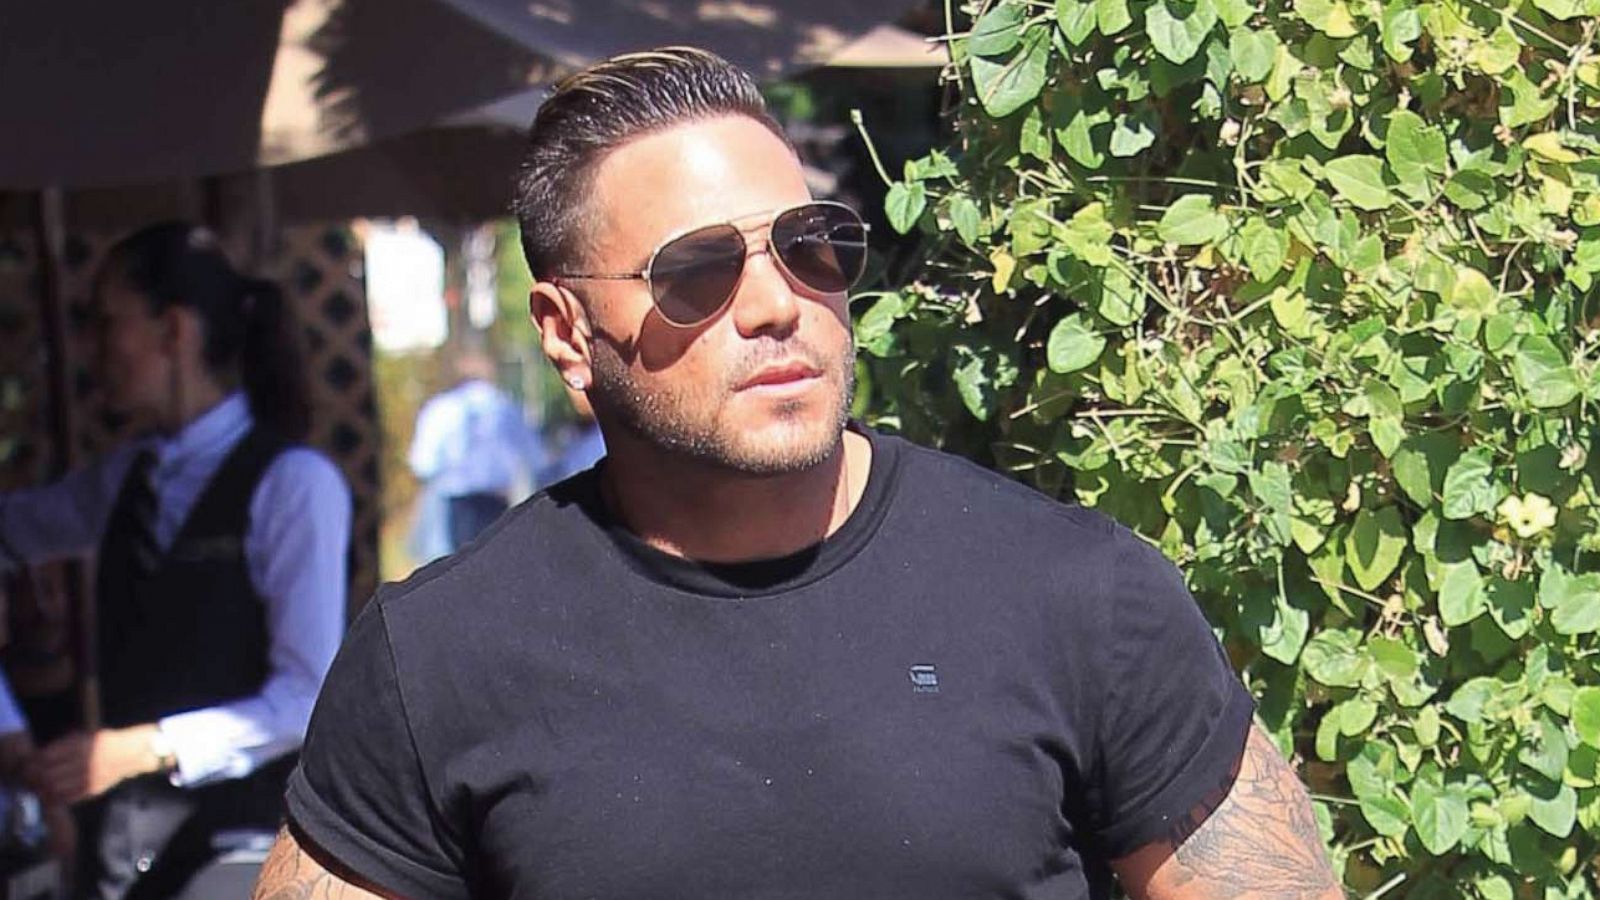 PHOTO: Ronnie Ortiz-Magro out in Los Angeles, October 3, 2019.